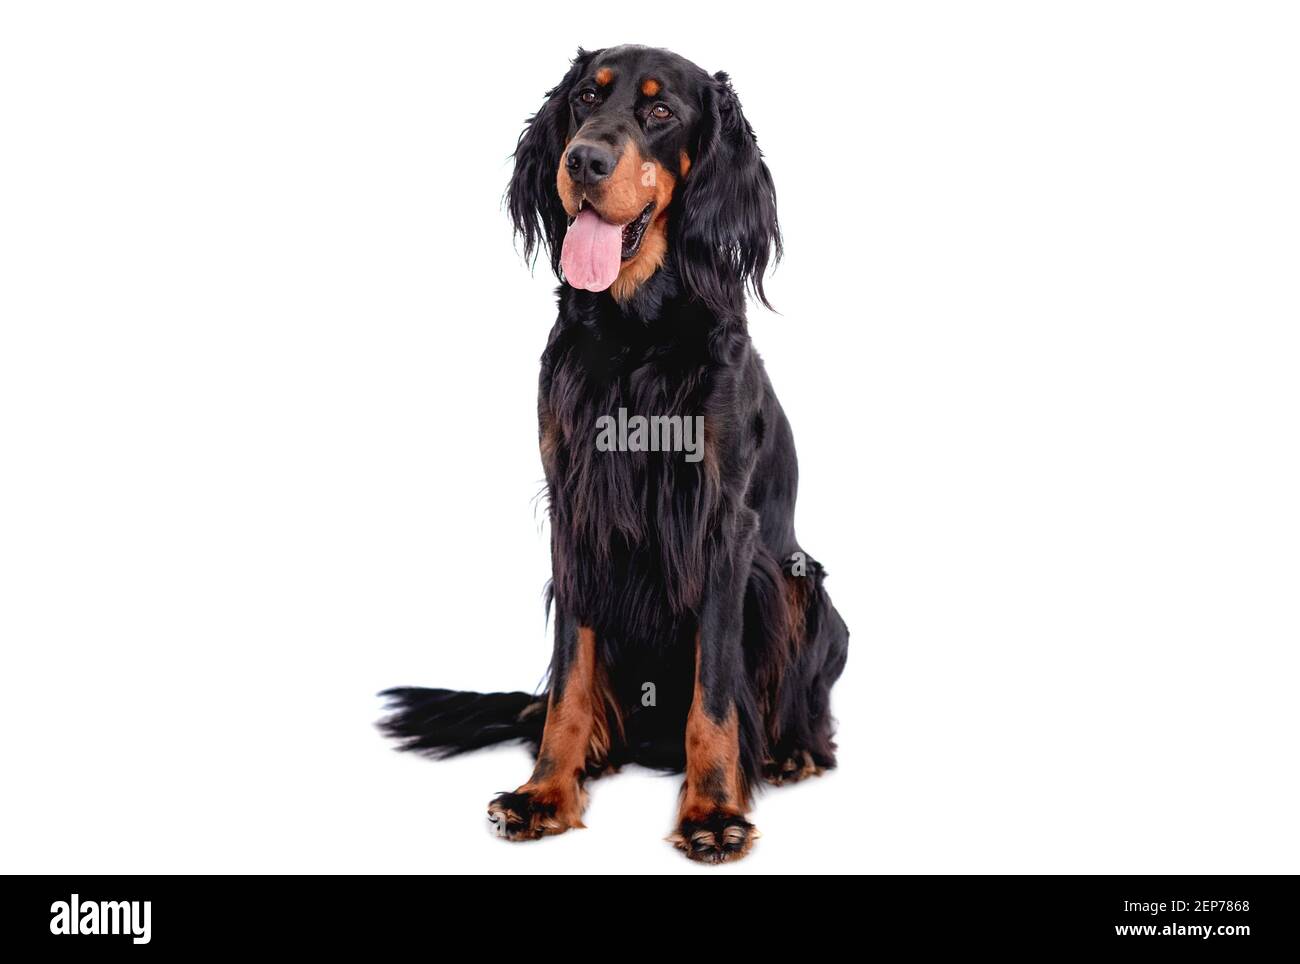 Scottish setter dog with tongue out Stock Photo